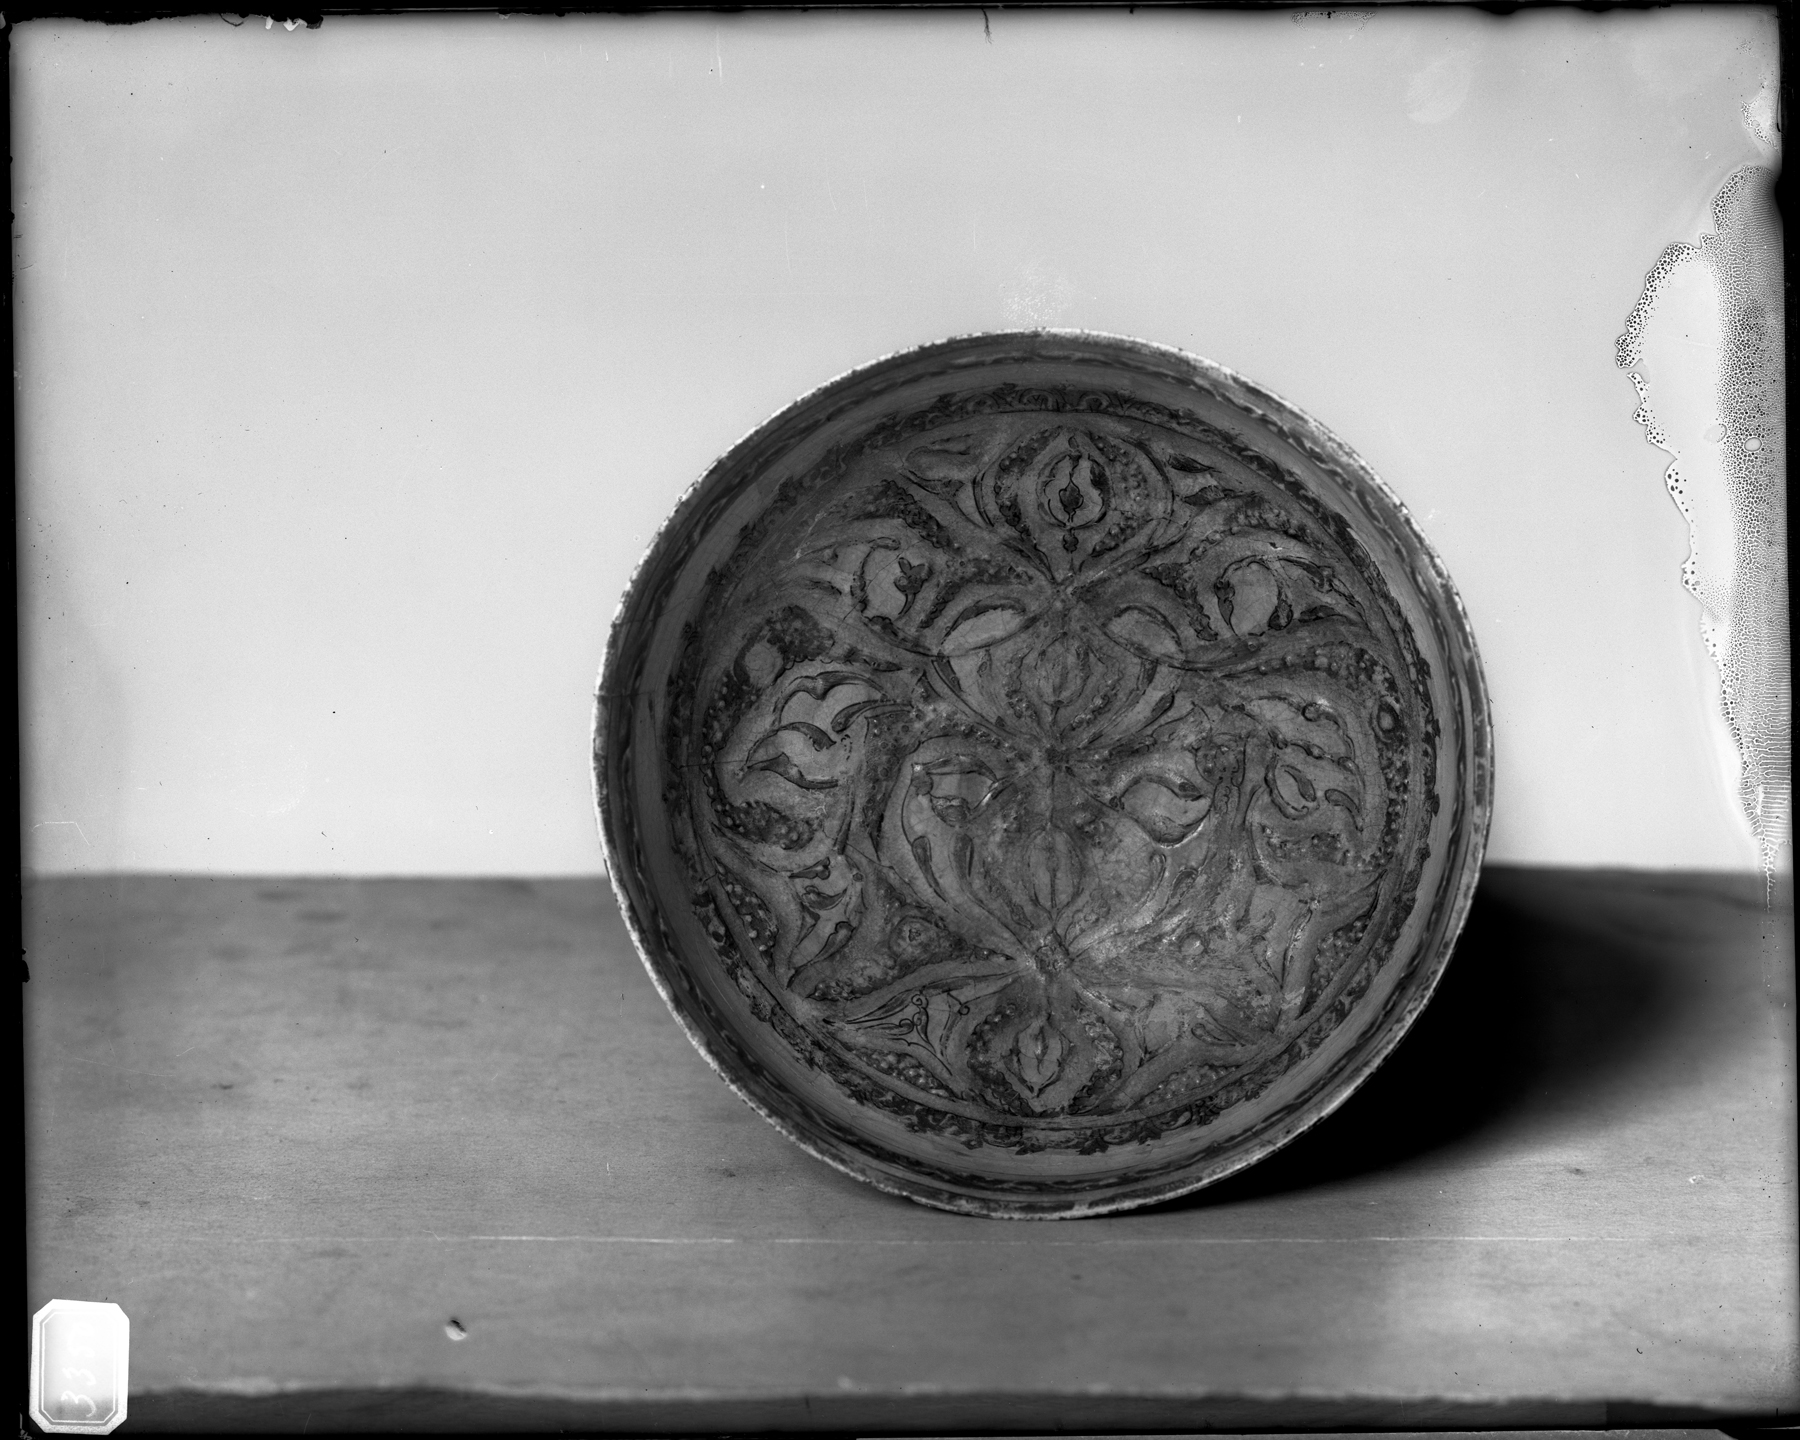 Image for Bowl with Geometric Patterns